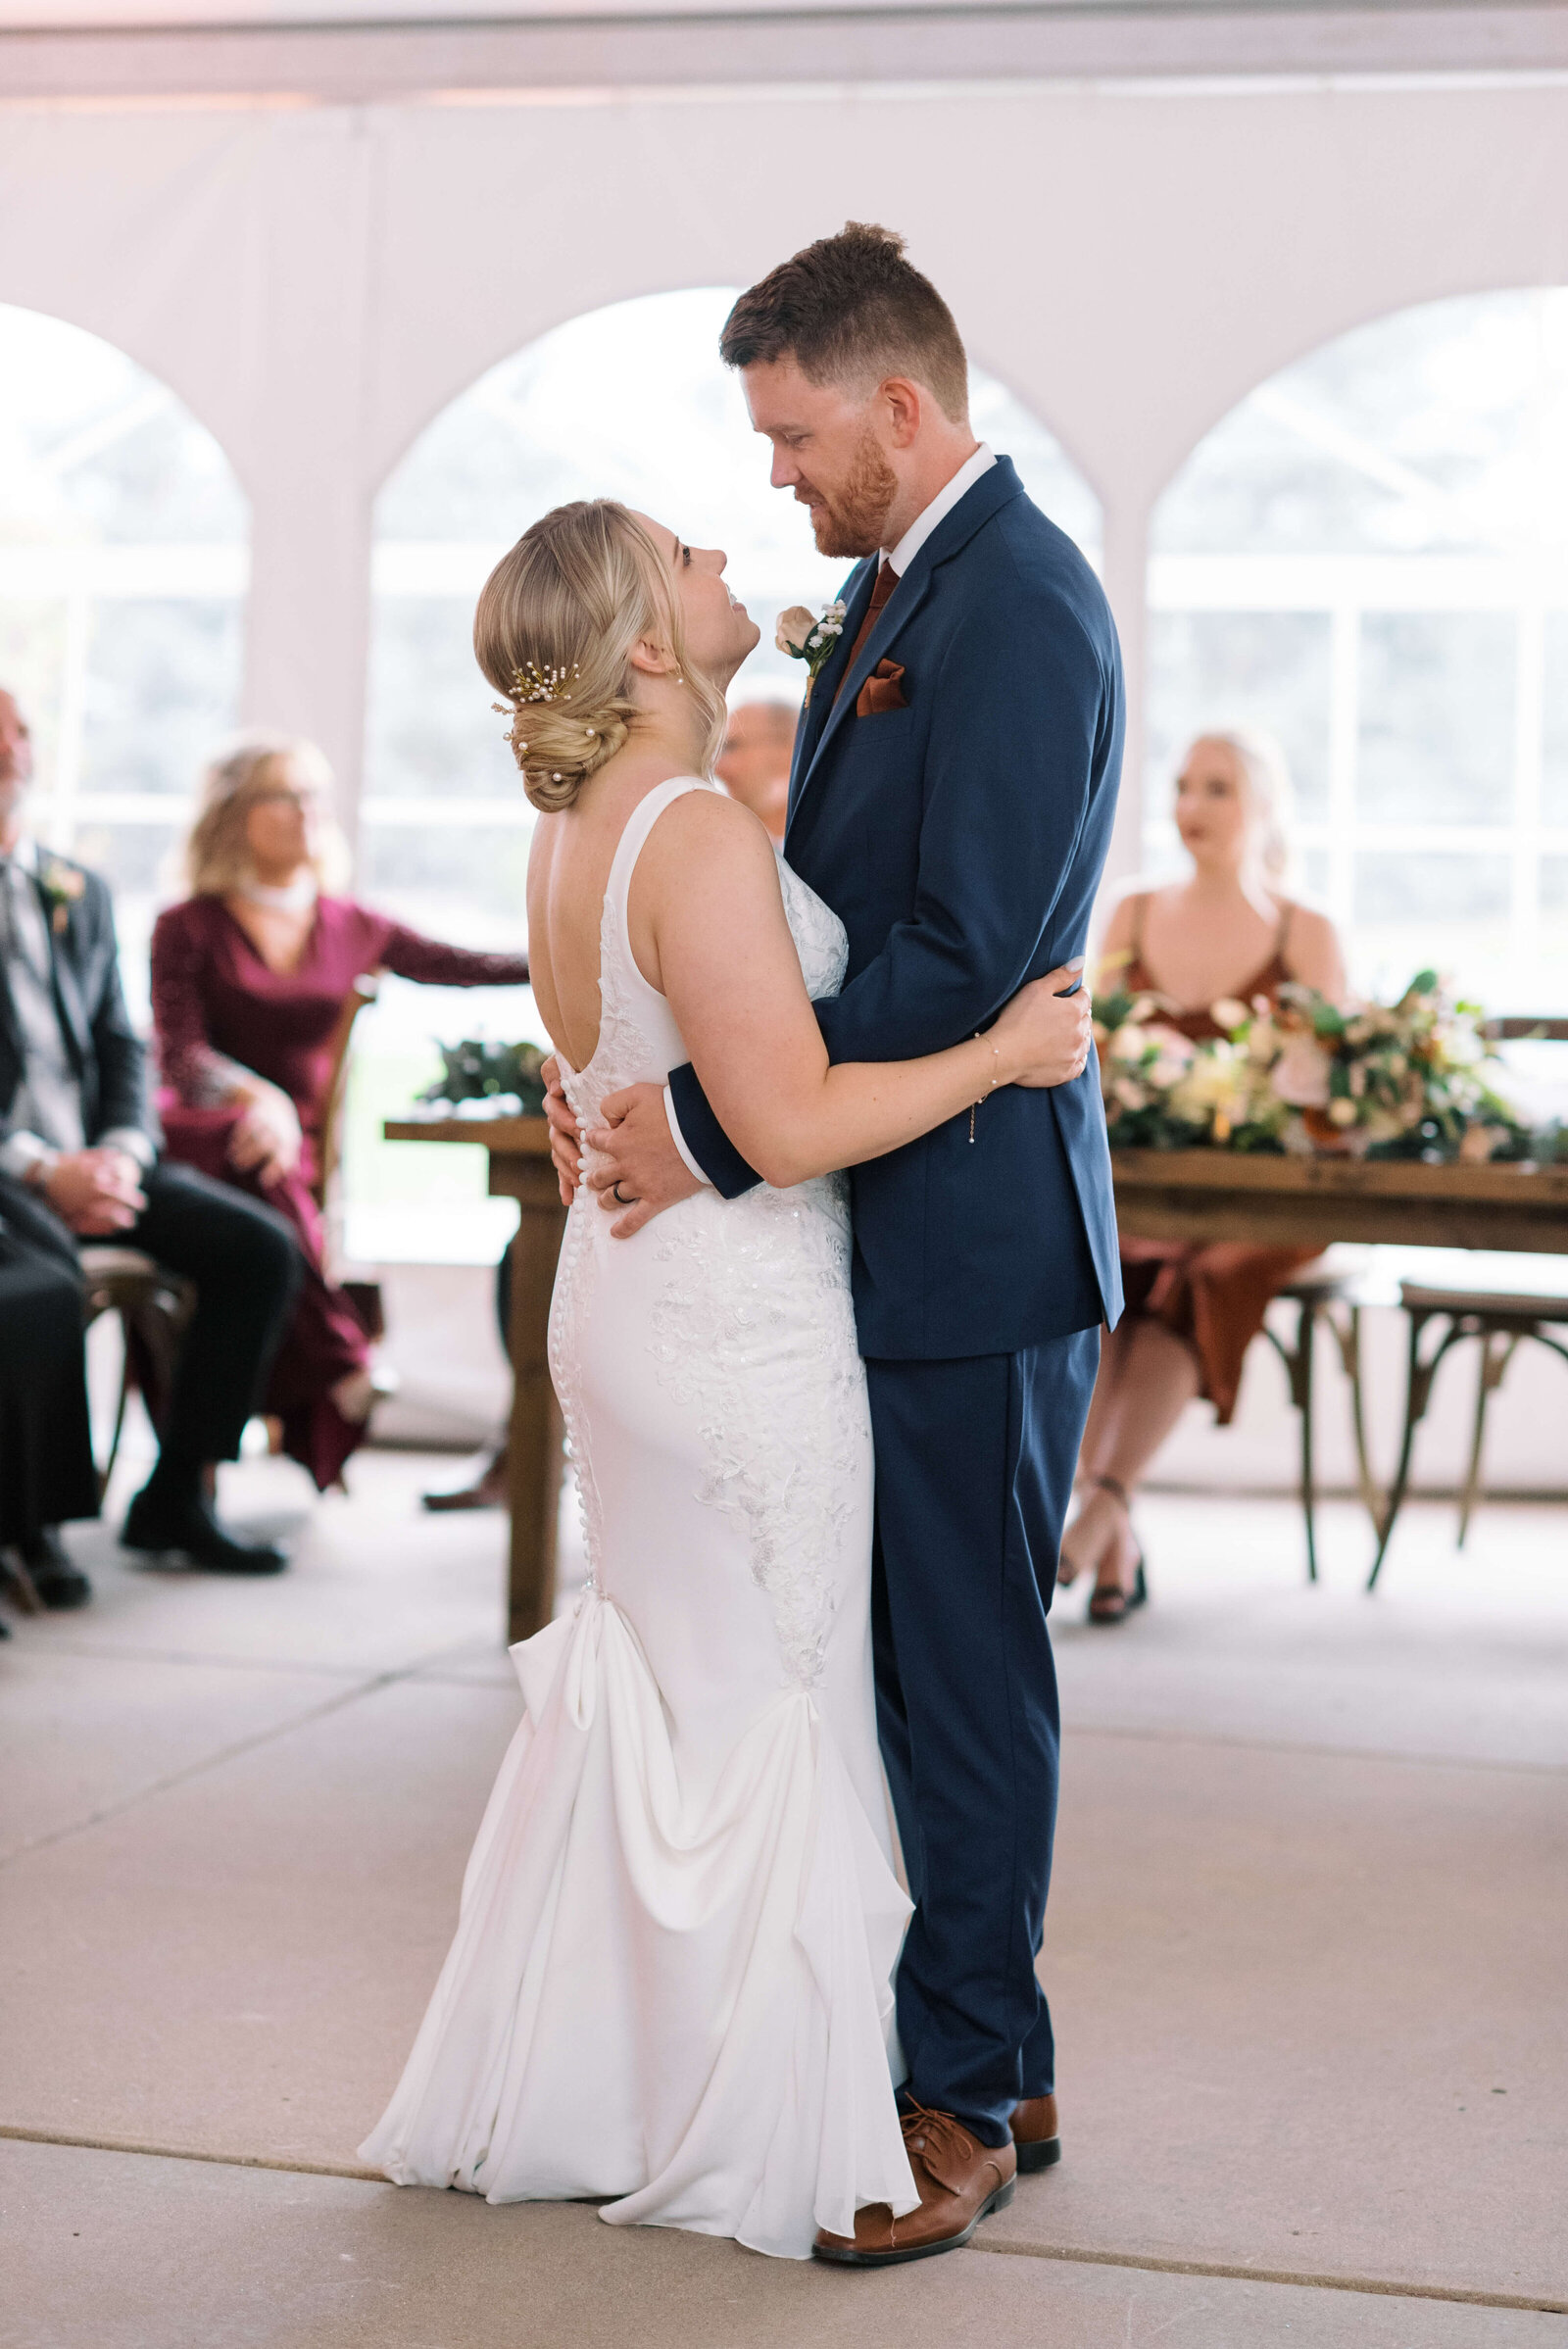 The first dance for this bride and groom took place in a light and airy white tent filled with family and friends